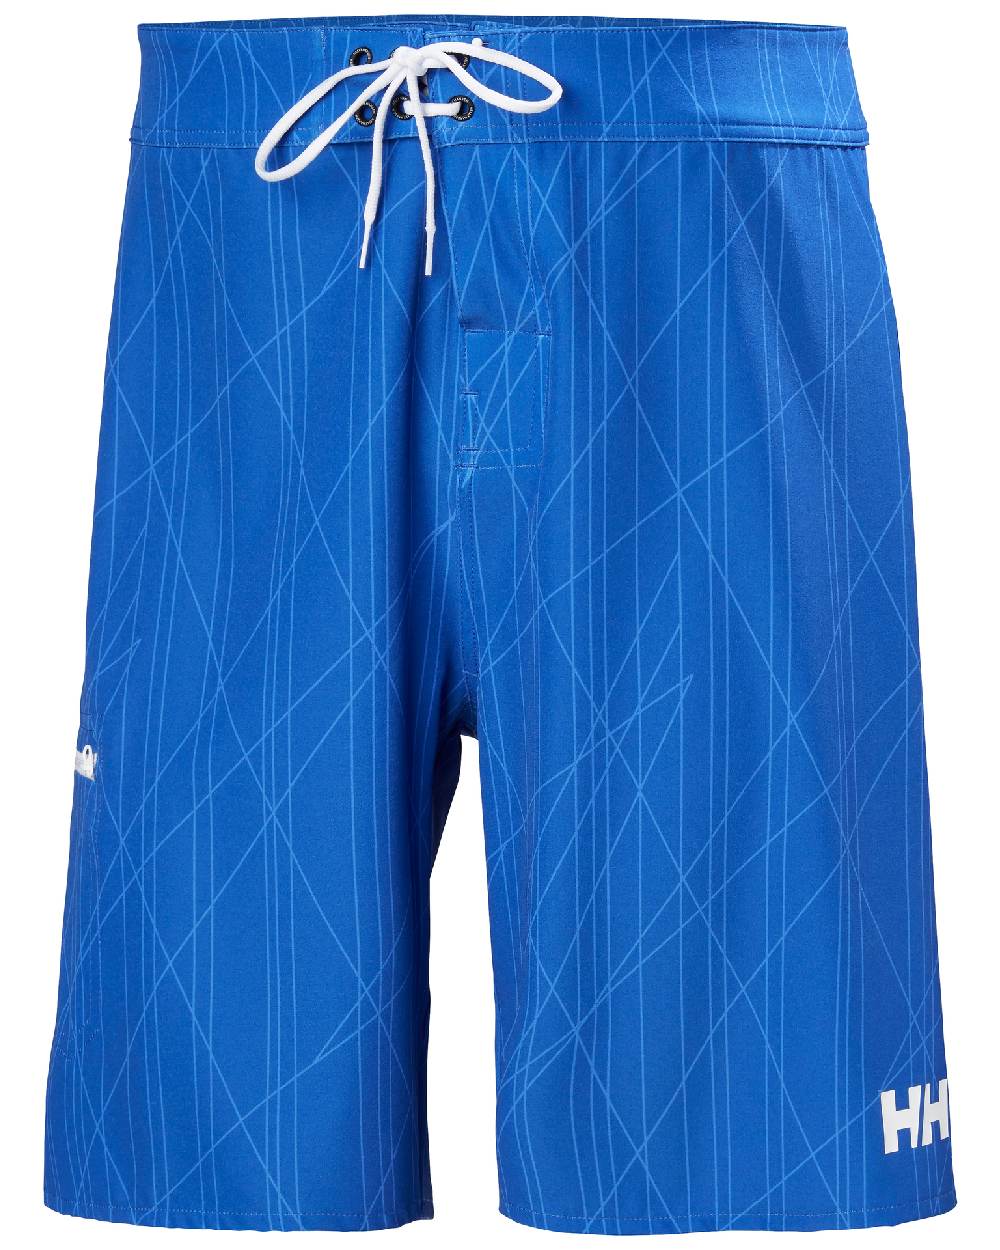 Cobalt 2.0 Coloured Helly Hansen Mens HP 9 inch Board Shorts 3.0 on white background 